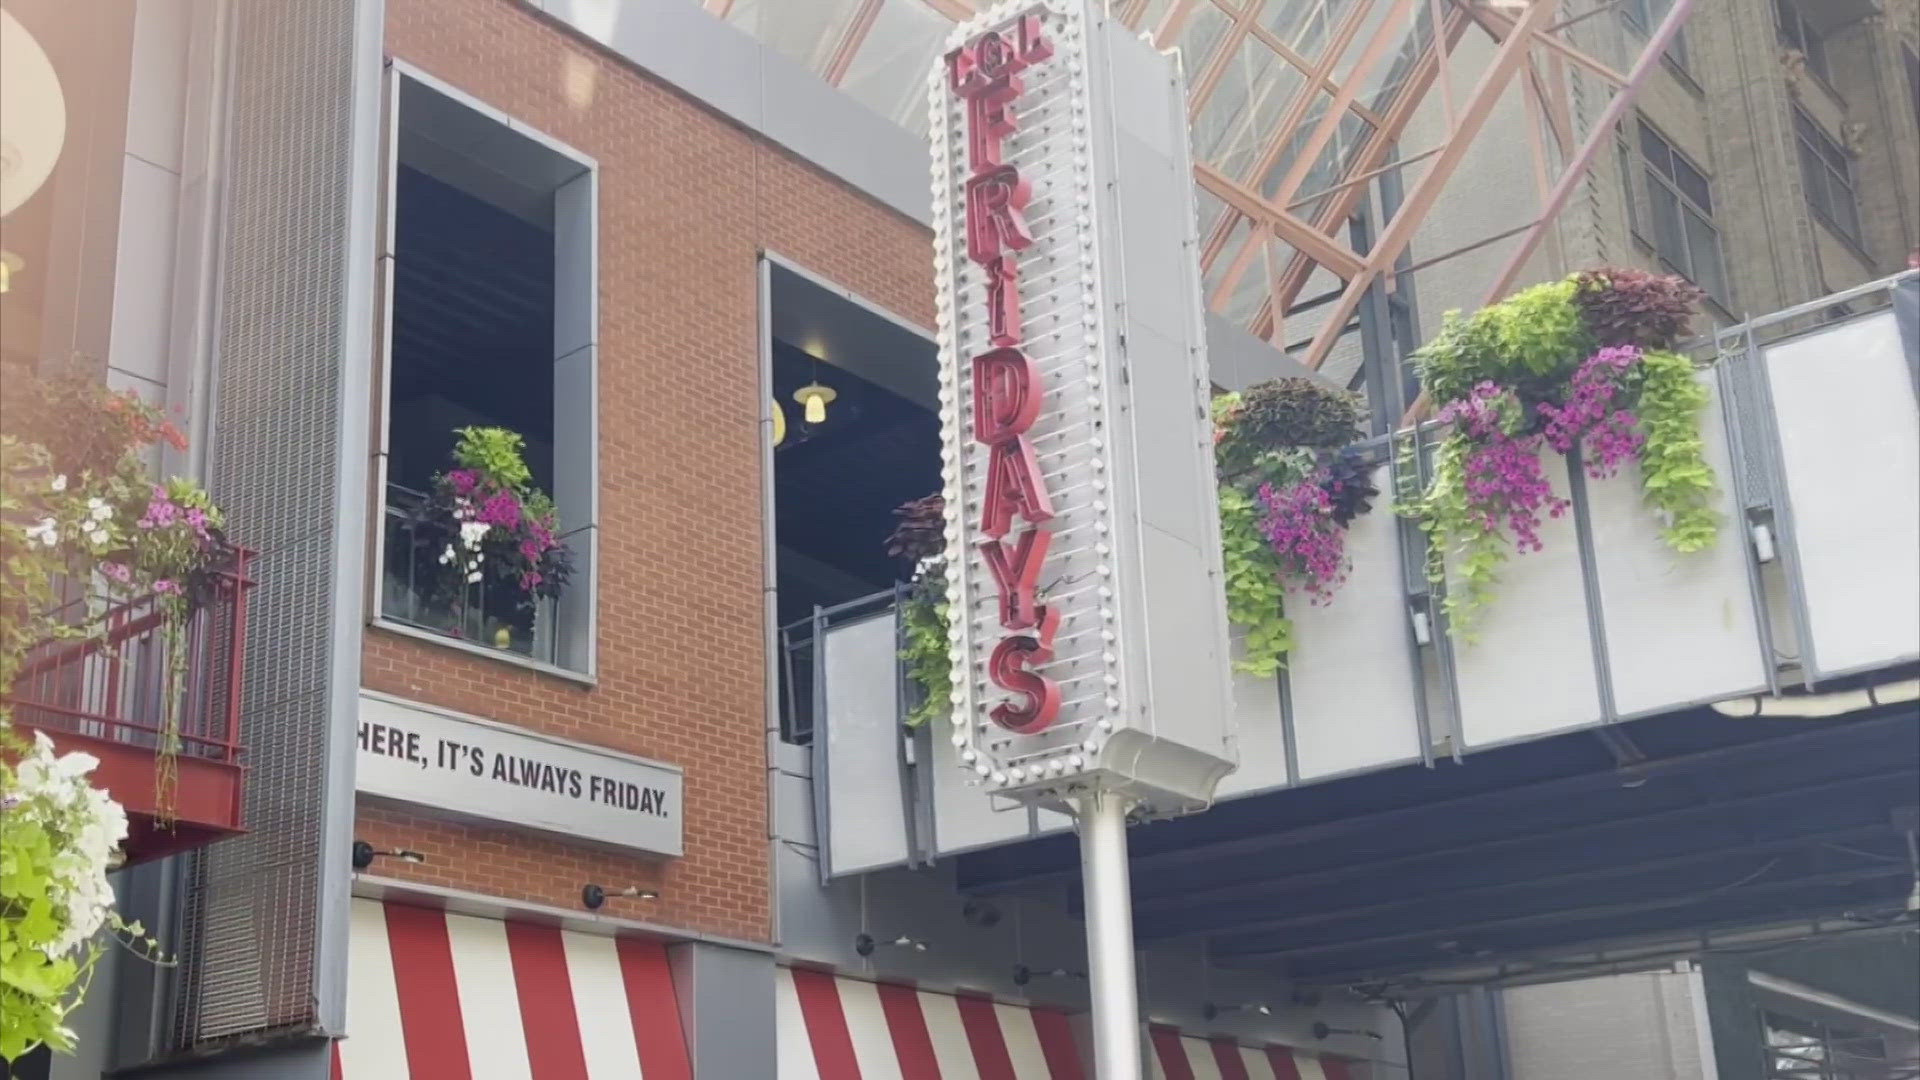 A Fourth Street Live! spokesperson confirmed TGI Fridays is leaving downtown Louisville.